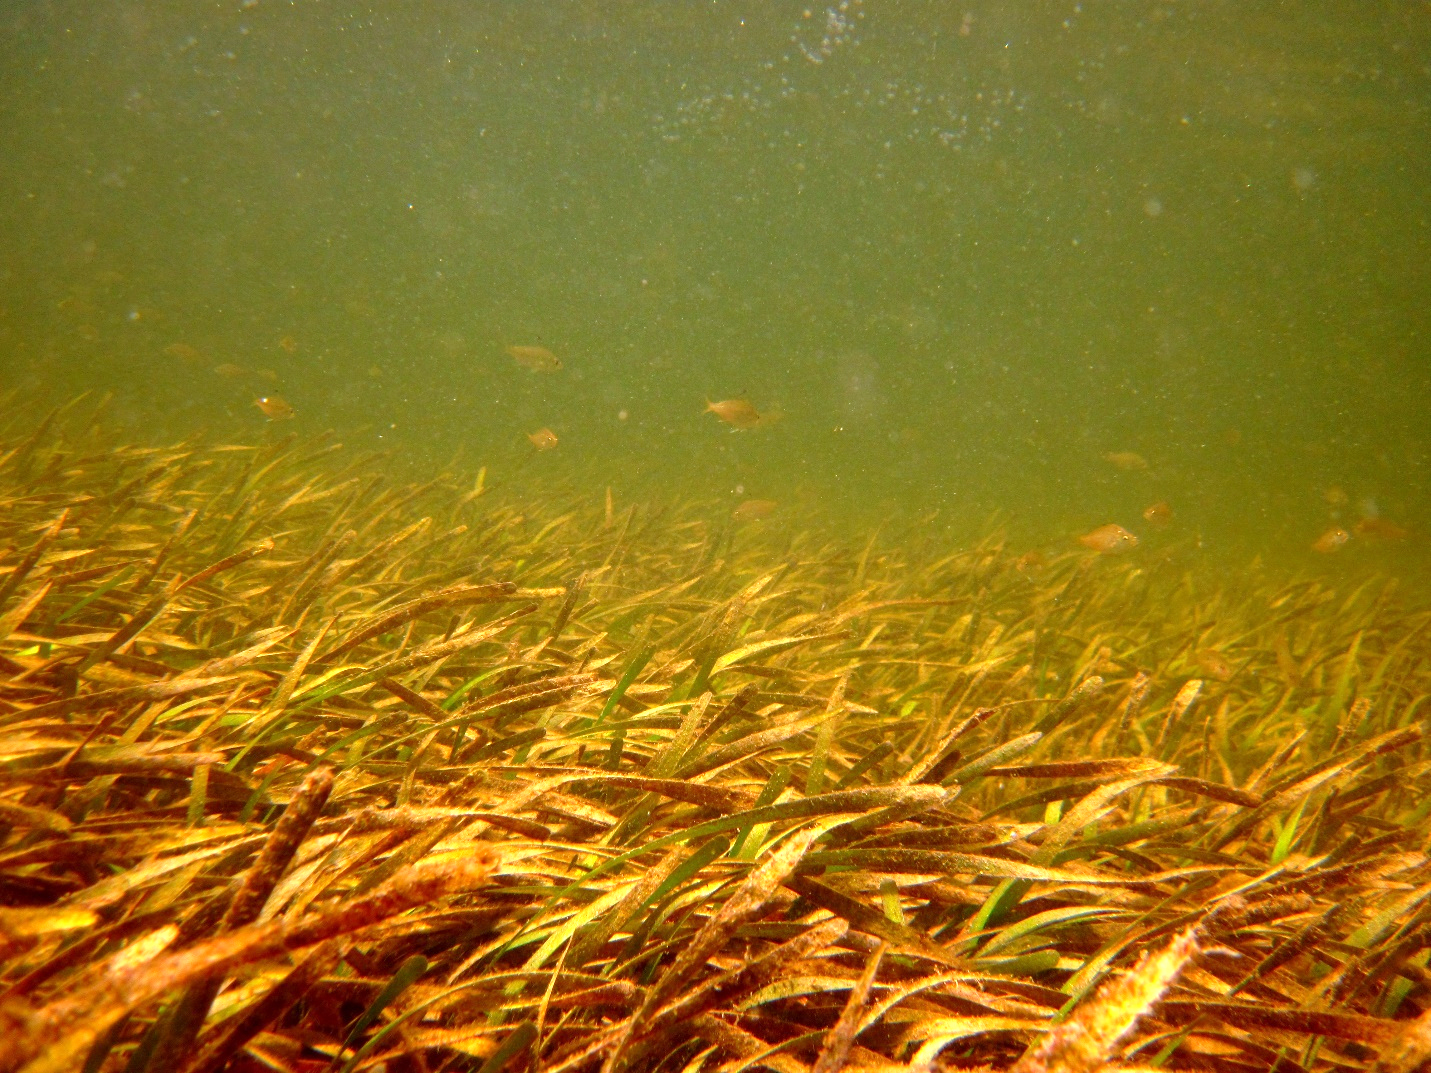 Turtle grass (Thalassia testudinum) is one of the three main seagrass species found in all of the five Charlotte Harbor Aquatic Preserves.